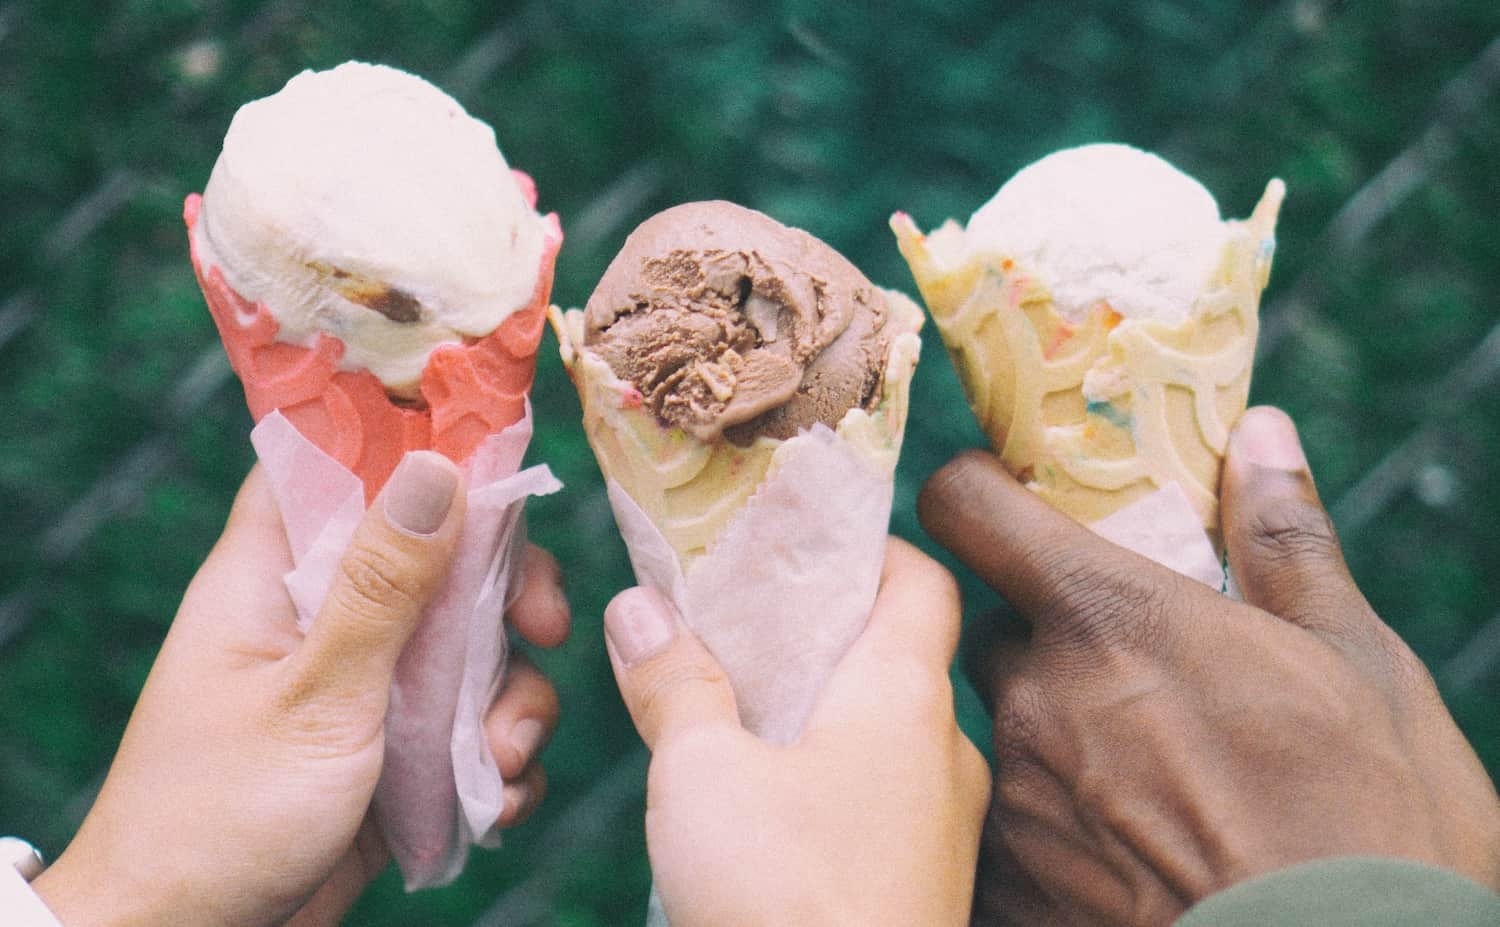 Business problems are like ice cream. There are multiple flavors.